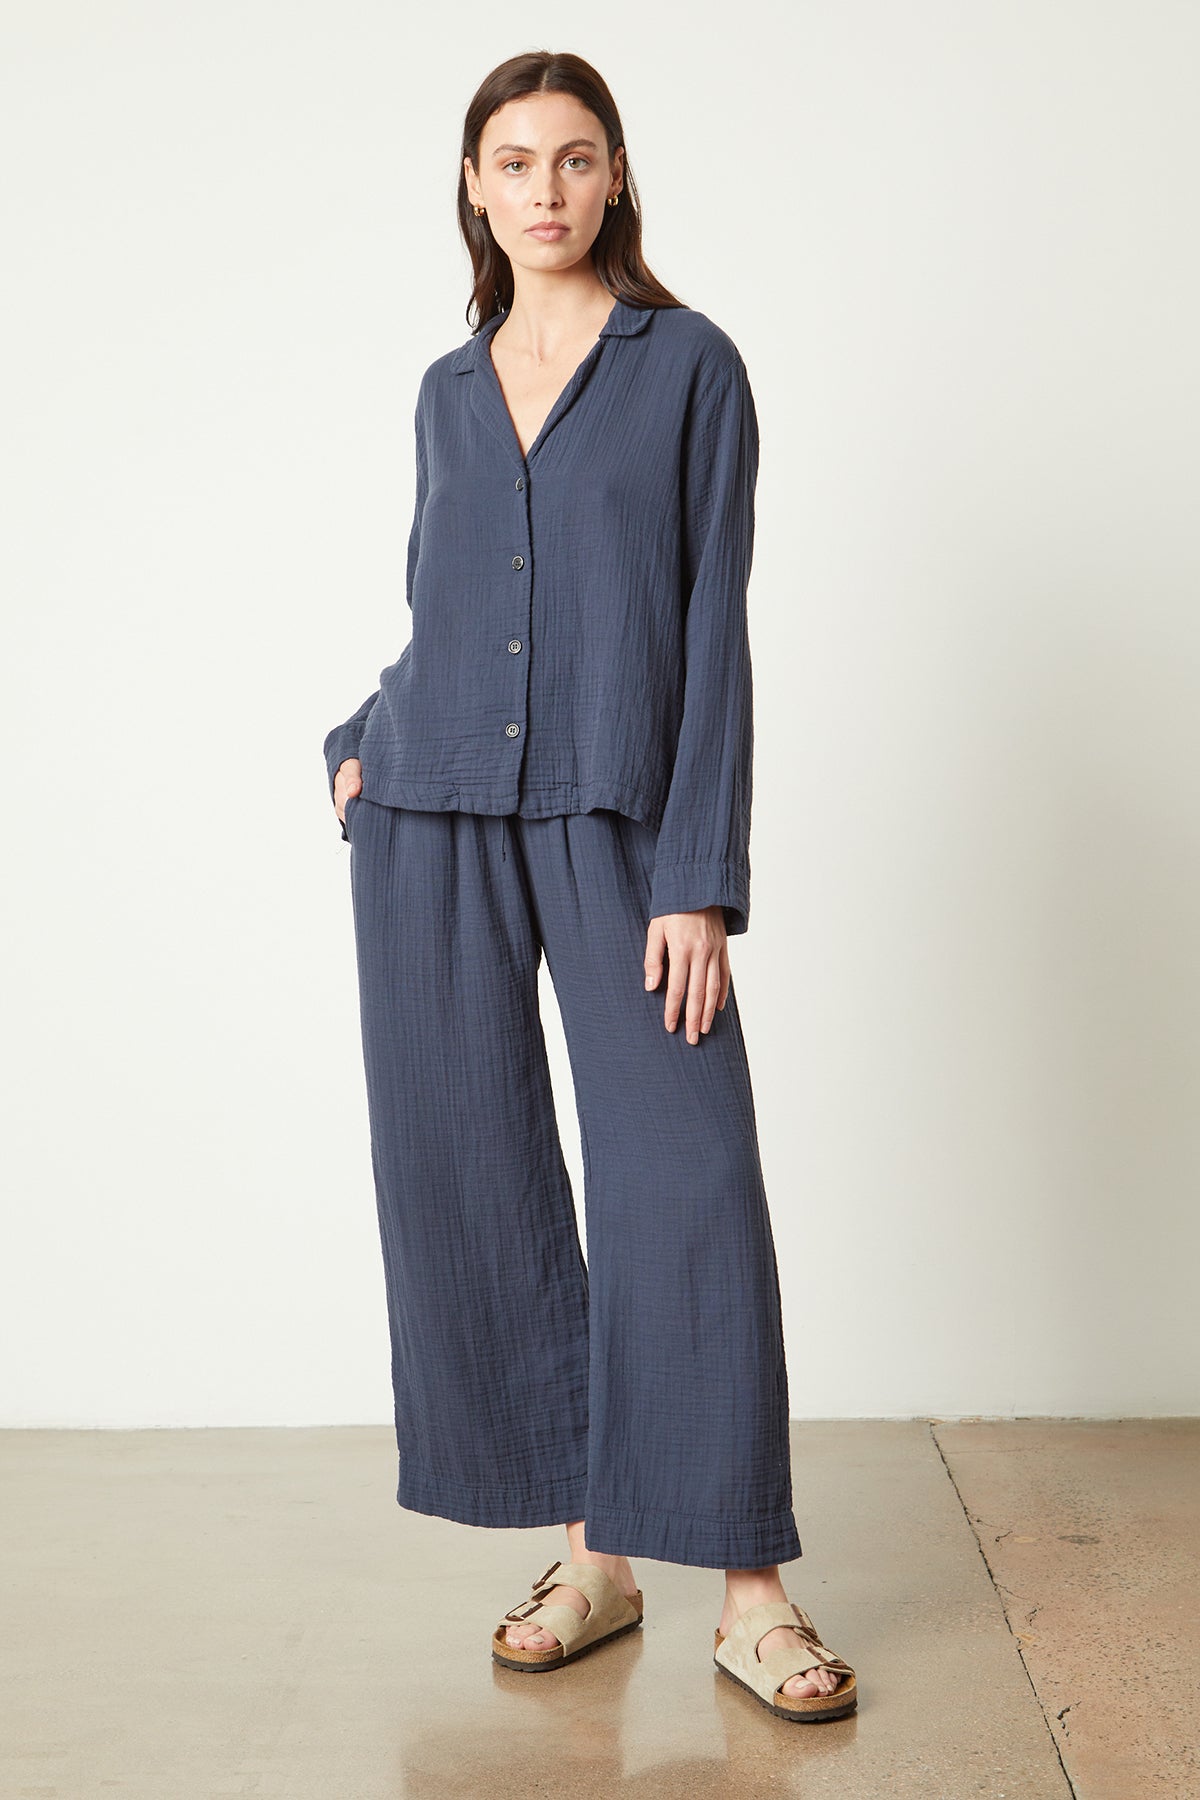 The model is wearing a blue linen shirt and Jenny Graham Home PAJAMA PANT.-25519563210945